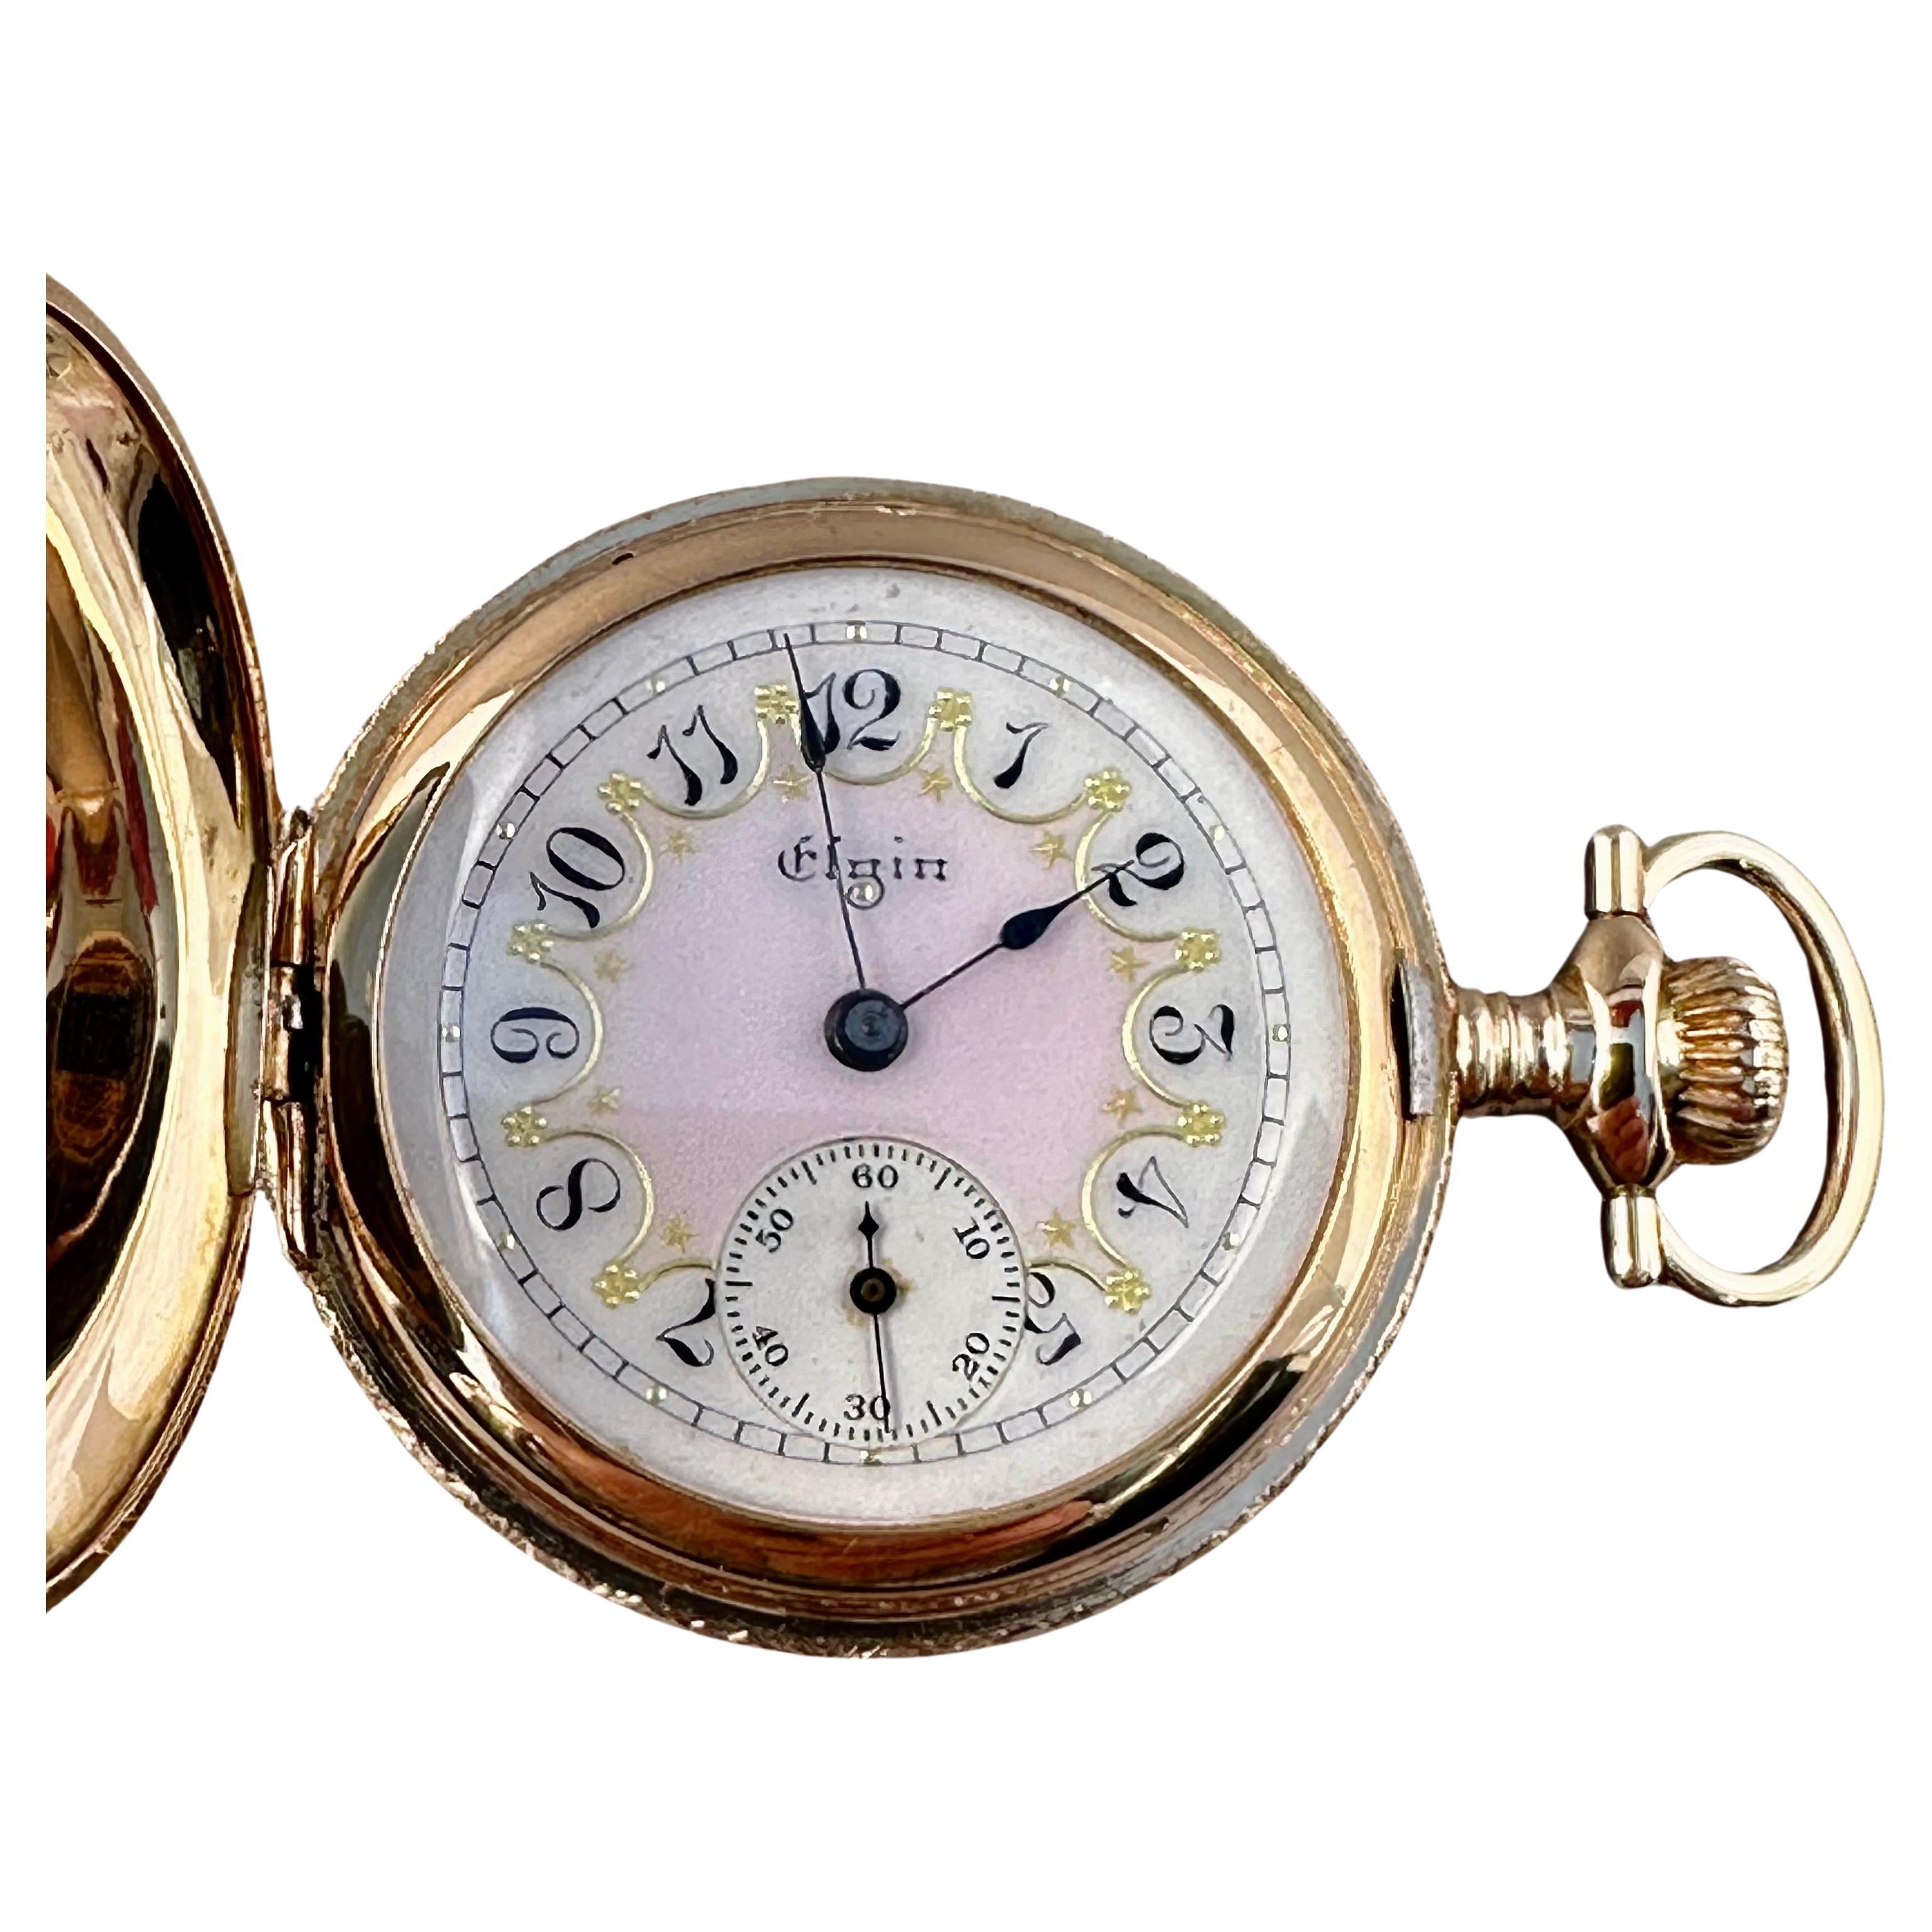 Elgin National Watch Co. Solid 14K Gold Pocket Watch in Mint Condition